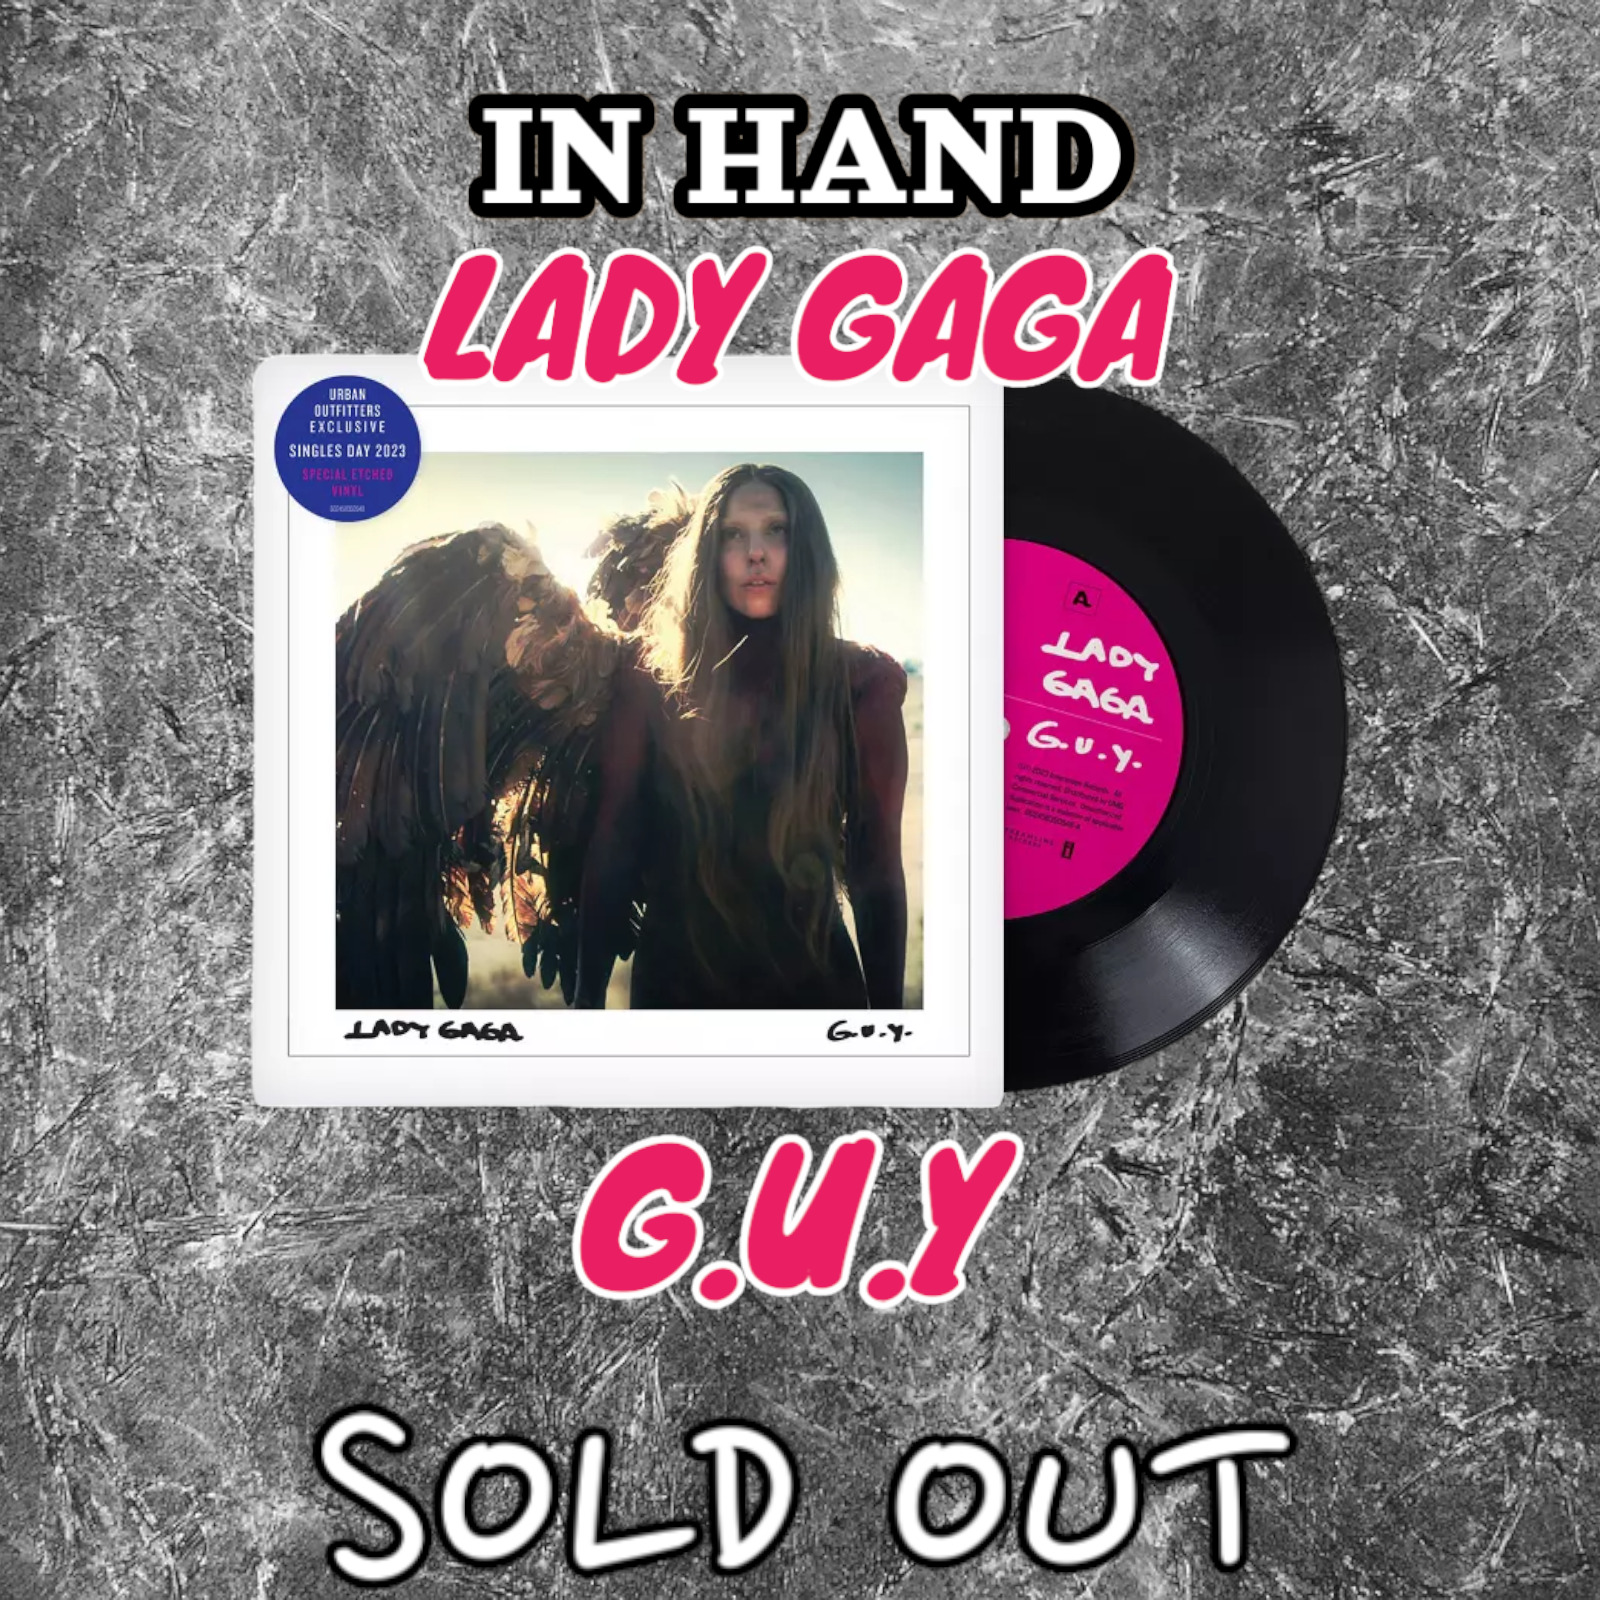 Lady Gaga G.U.Y Vinyl 7” Single LP Urban Outfitters Exclusive SOLD OUT - IN HAND